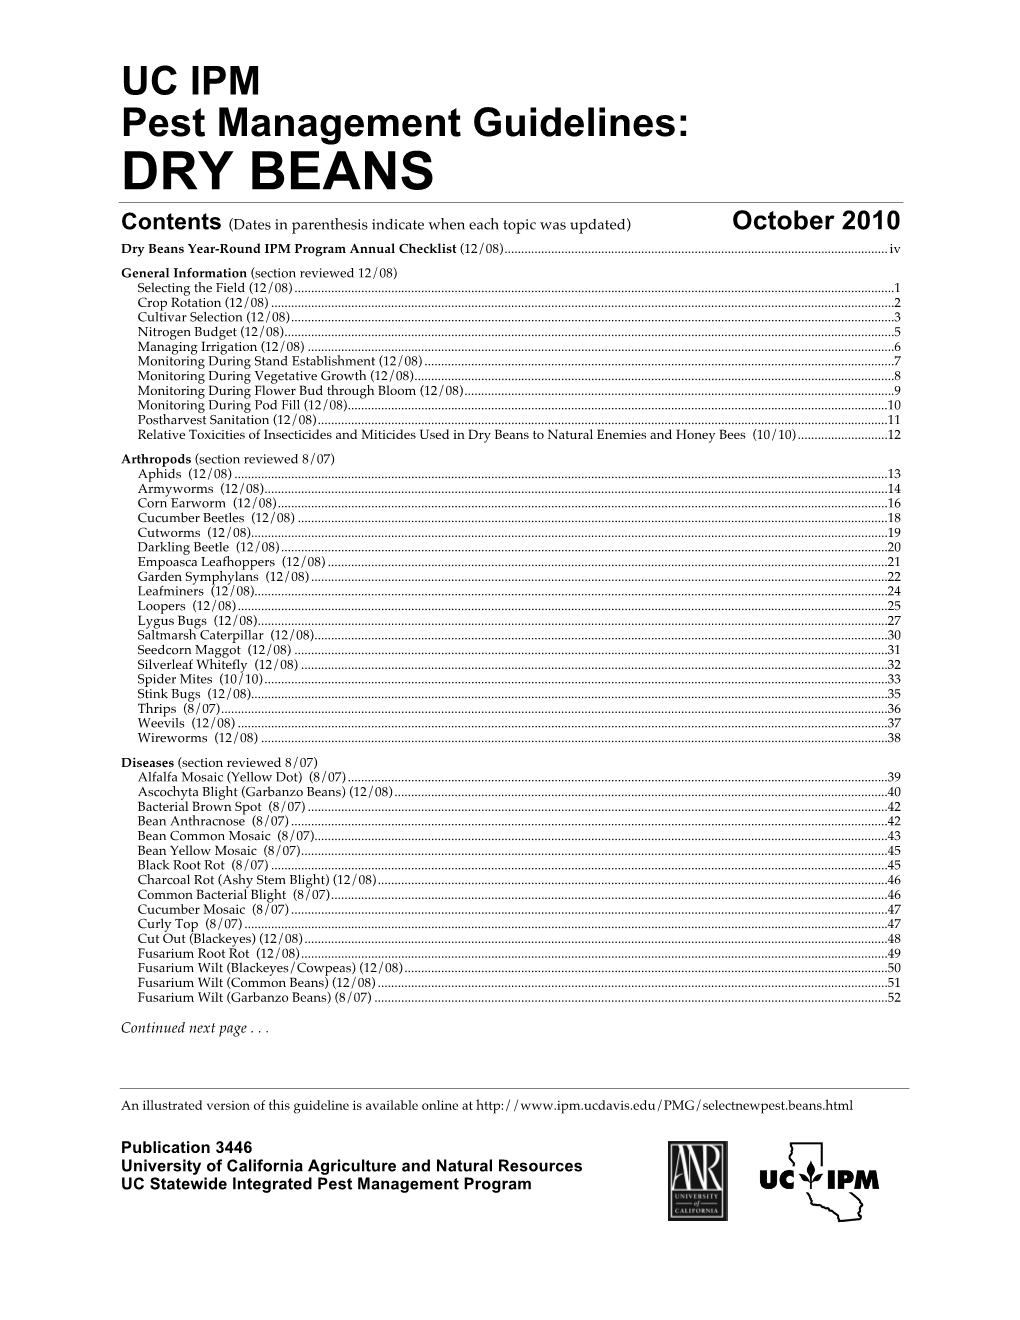 UC IPM Pest Management Guidelines: DRY BEANS